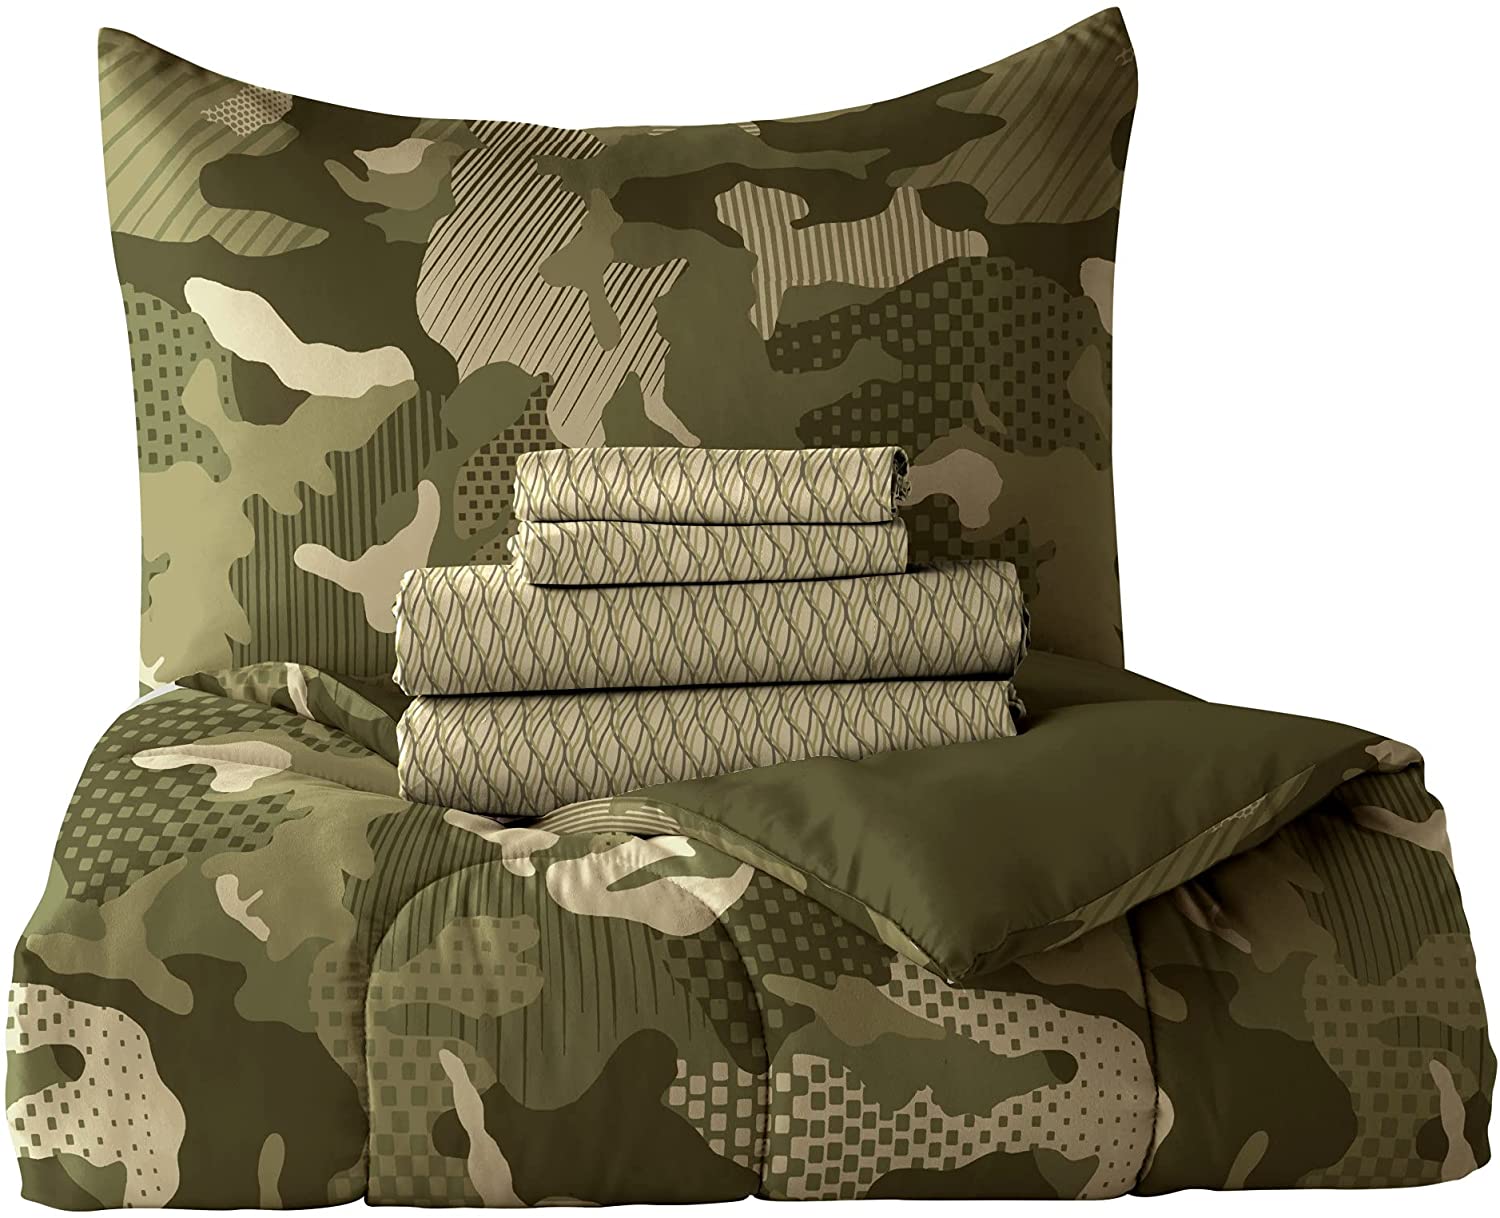 Dream Factory Geo Camo Twin 5 Piece Comforter Set, Bed-in-a-Bag, Cotton/Polyester, Camouflage, Multi, Unisex, Child - image 3 of 12